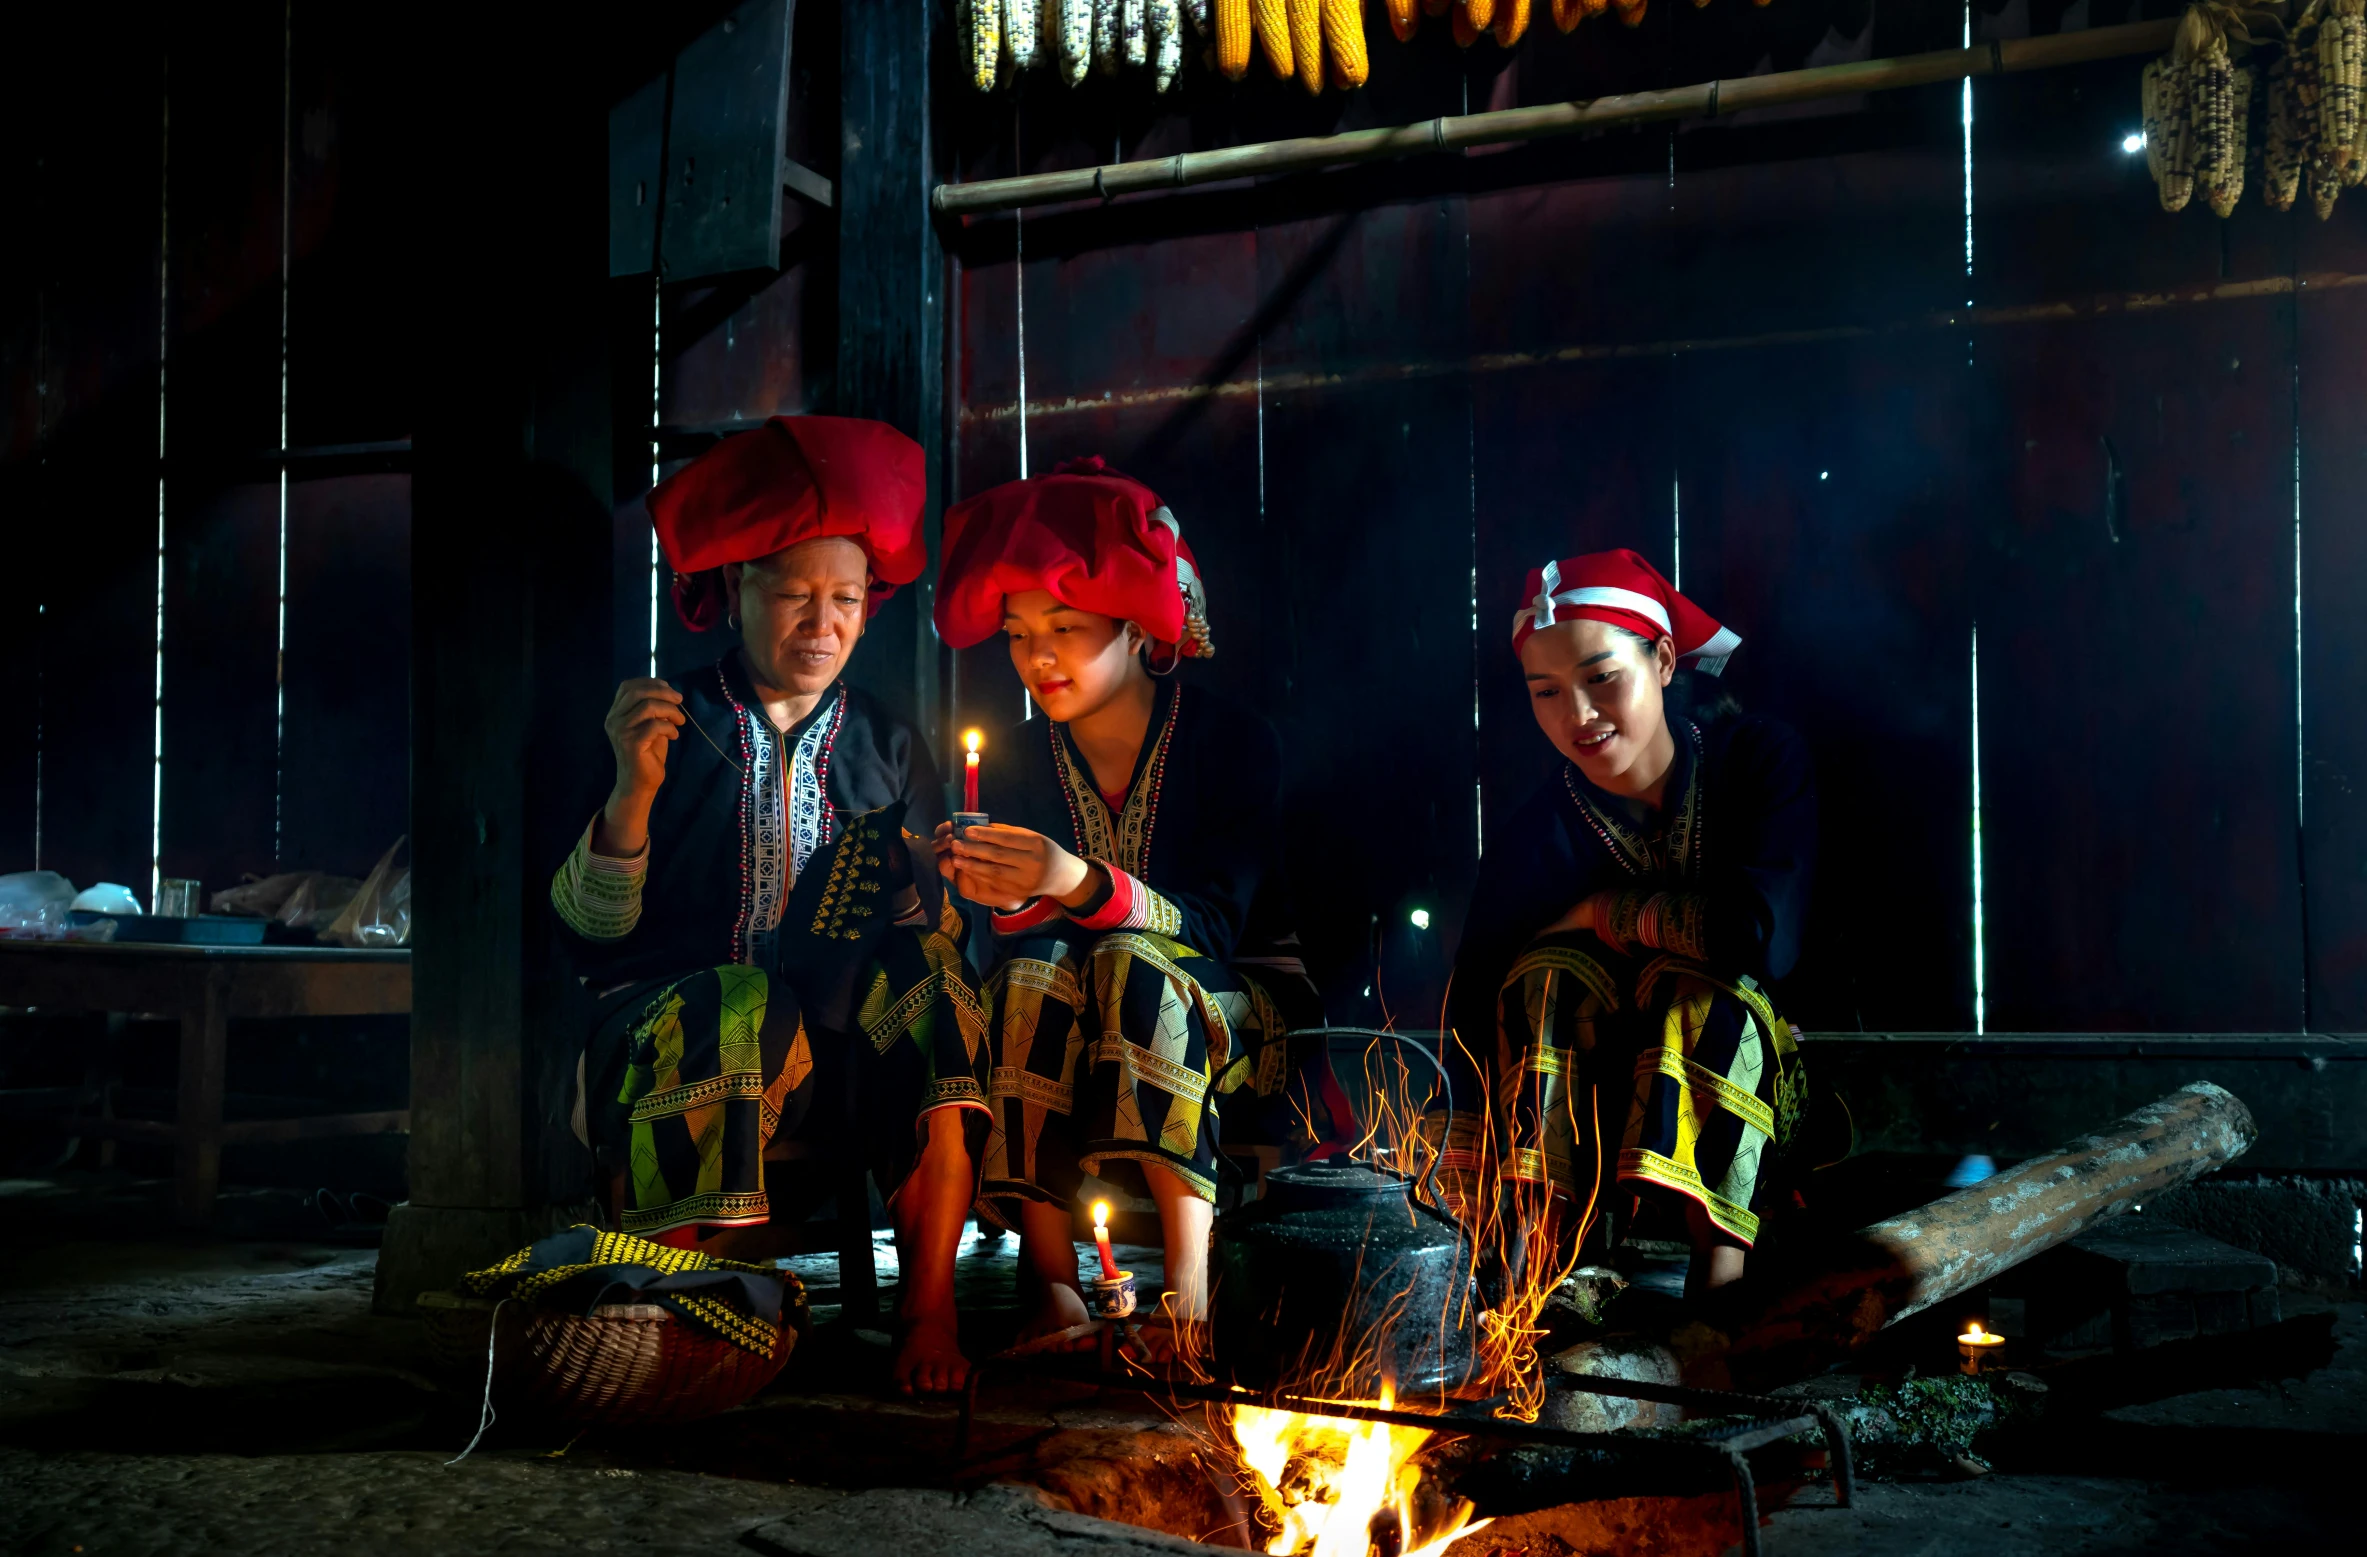 the asian people dressed in the traditional dress and wearing headwear stand near an open fire